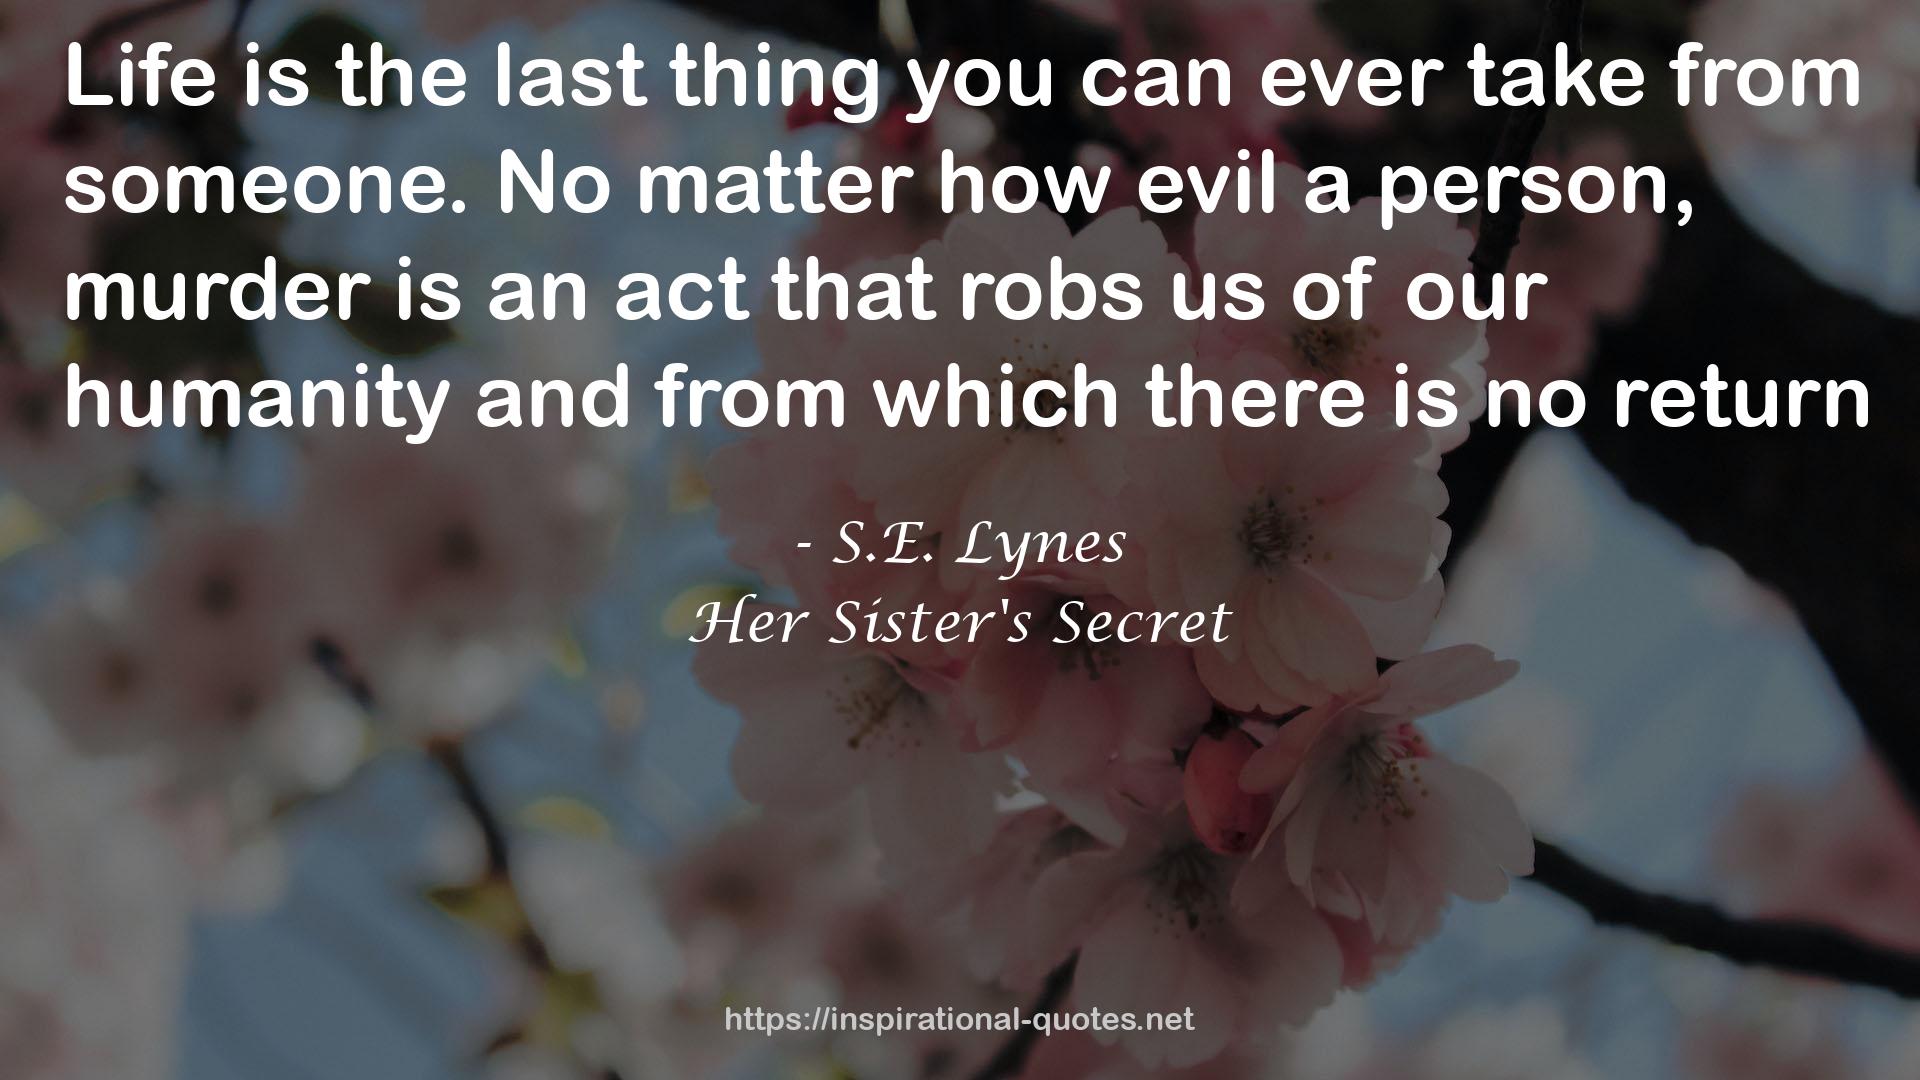 Her Sister's Secret QUOTES